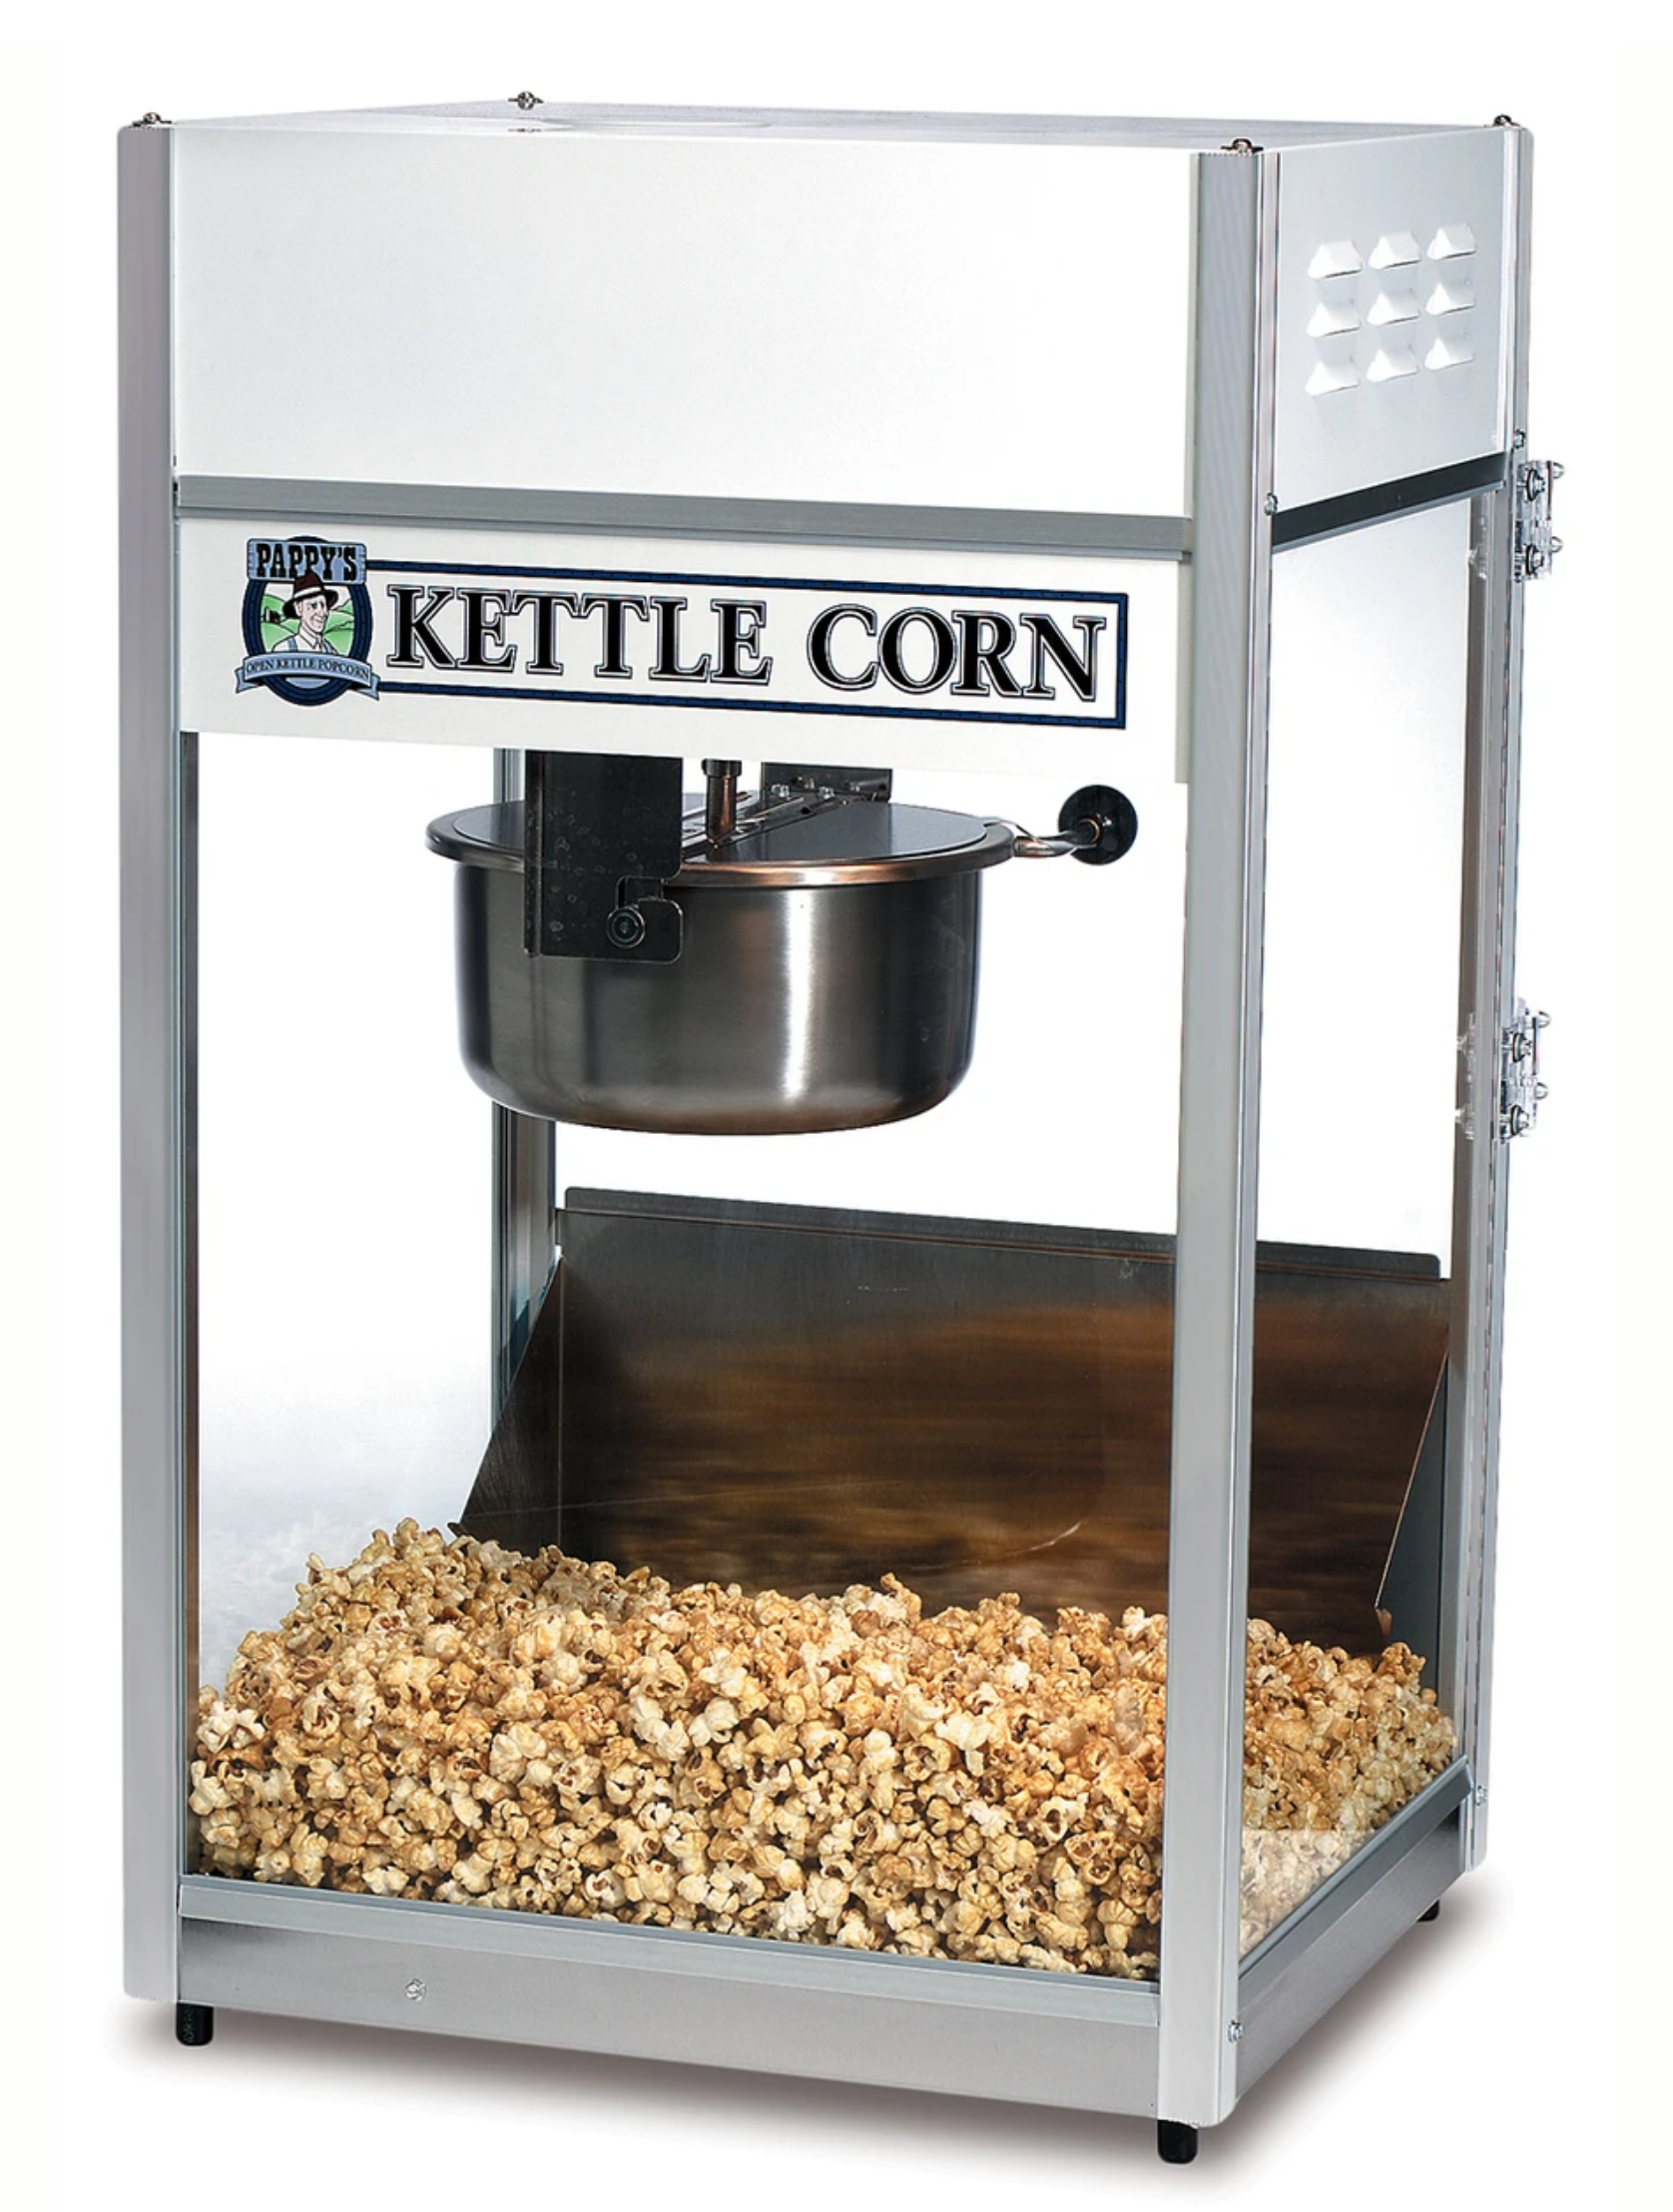 Concession: Popcorn Machine - Party Rentals (Bounce Houses, Tables, Chairs,  Giant Games) in Milwaukee, WI and Surrounding Areas